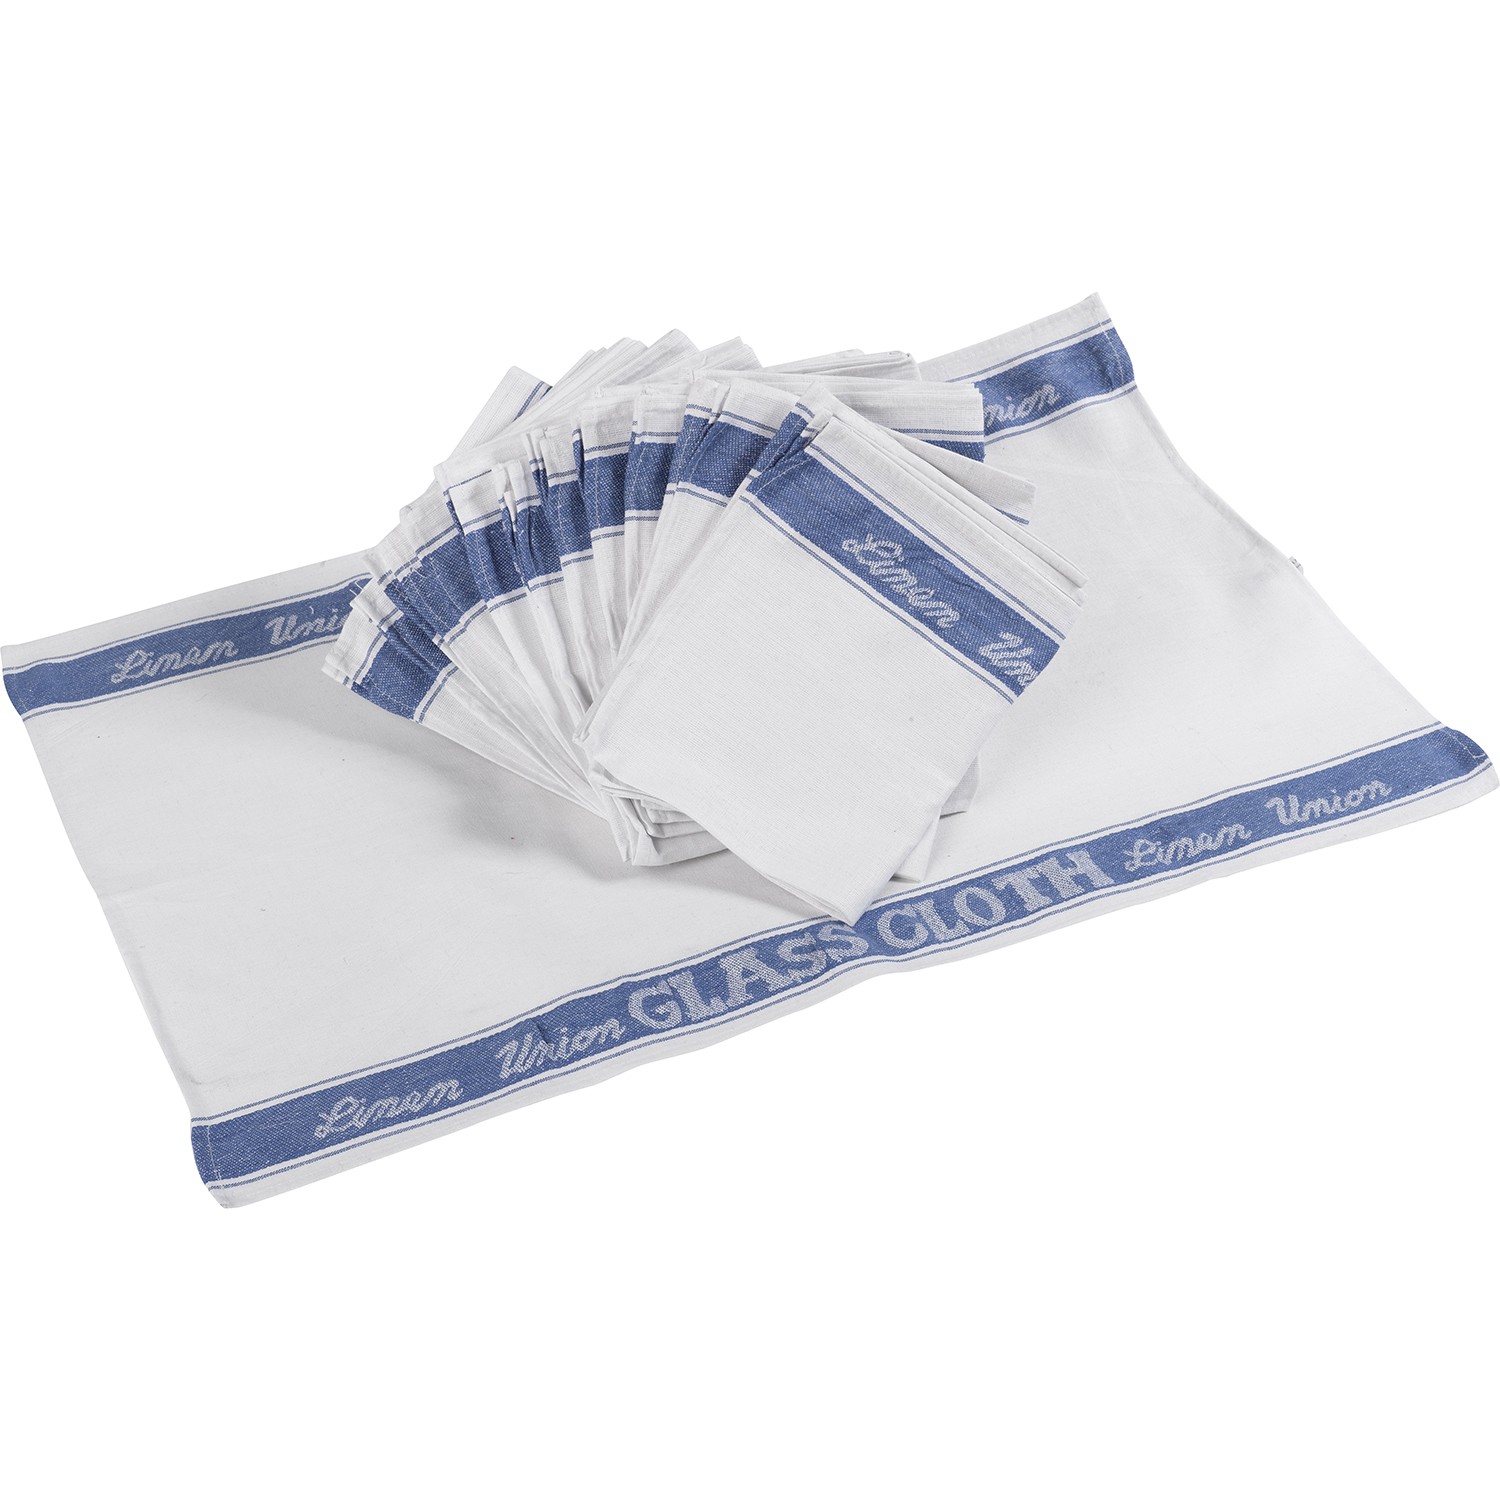 Pack of 12 Linen Union Glass Cloths (4 Colours Available)